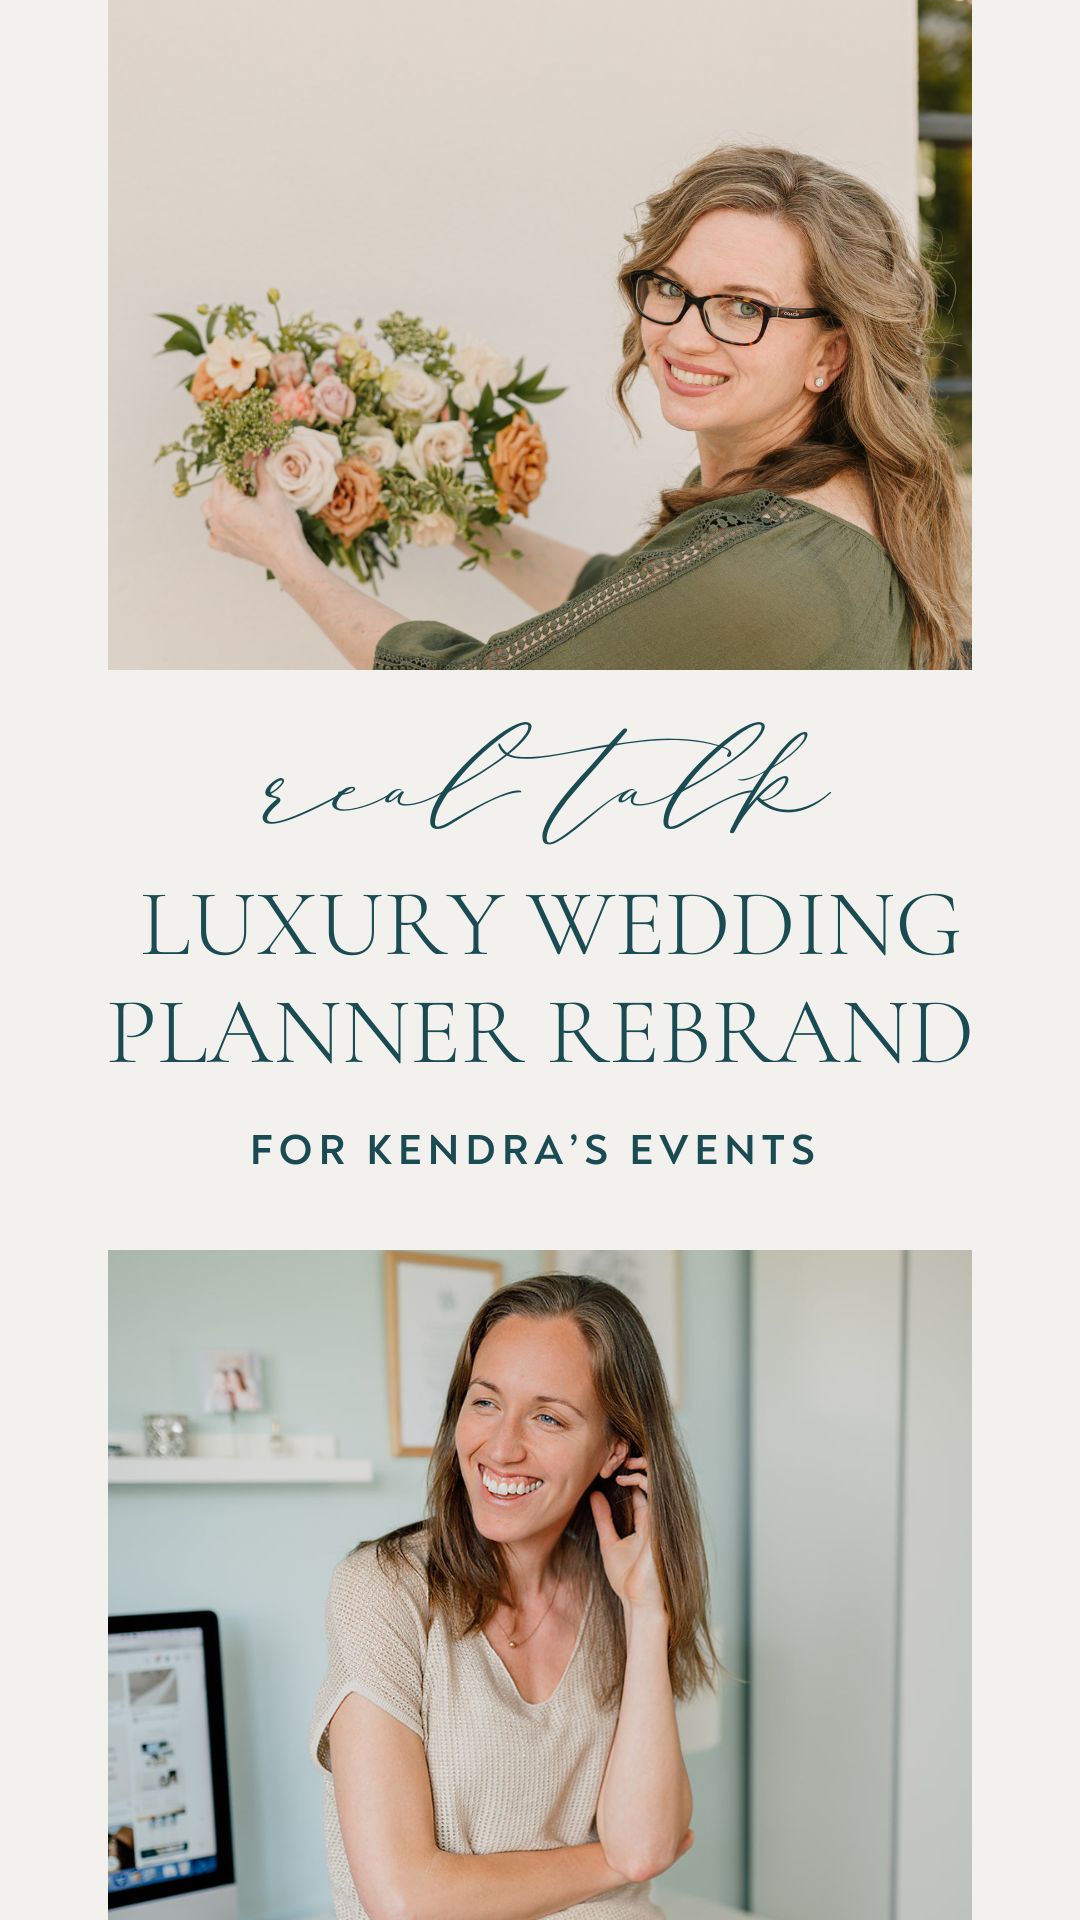 photo of Kendra and Carrie with the text "real talk luxury wedding planner rebrand for Kendra's Events"